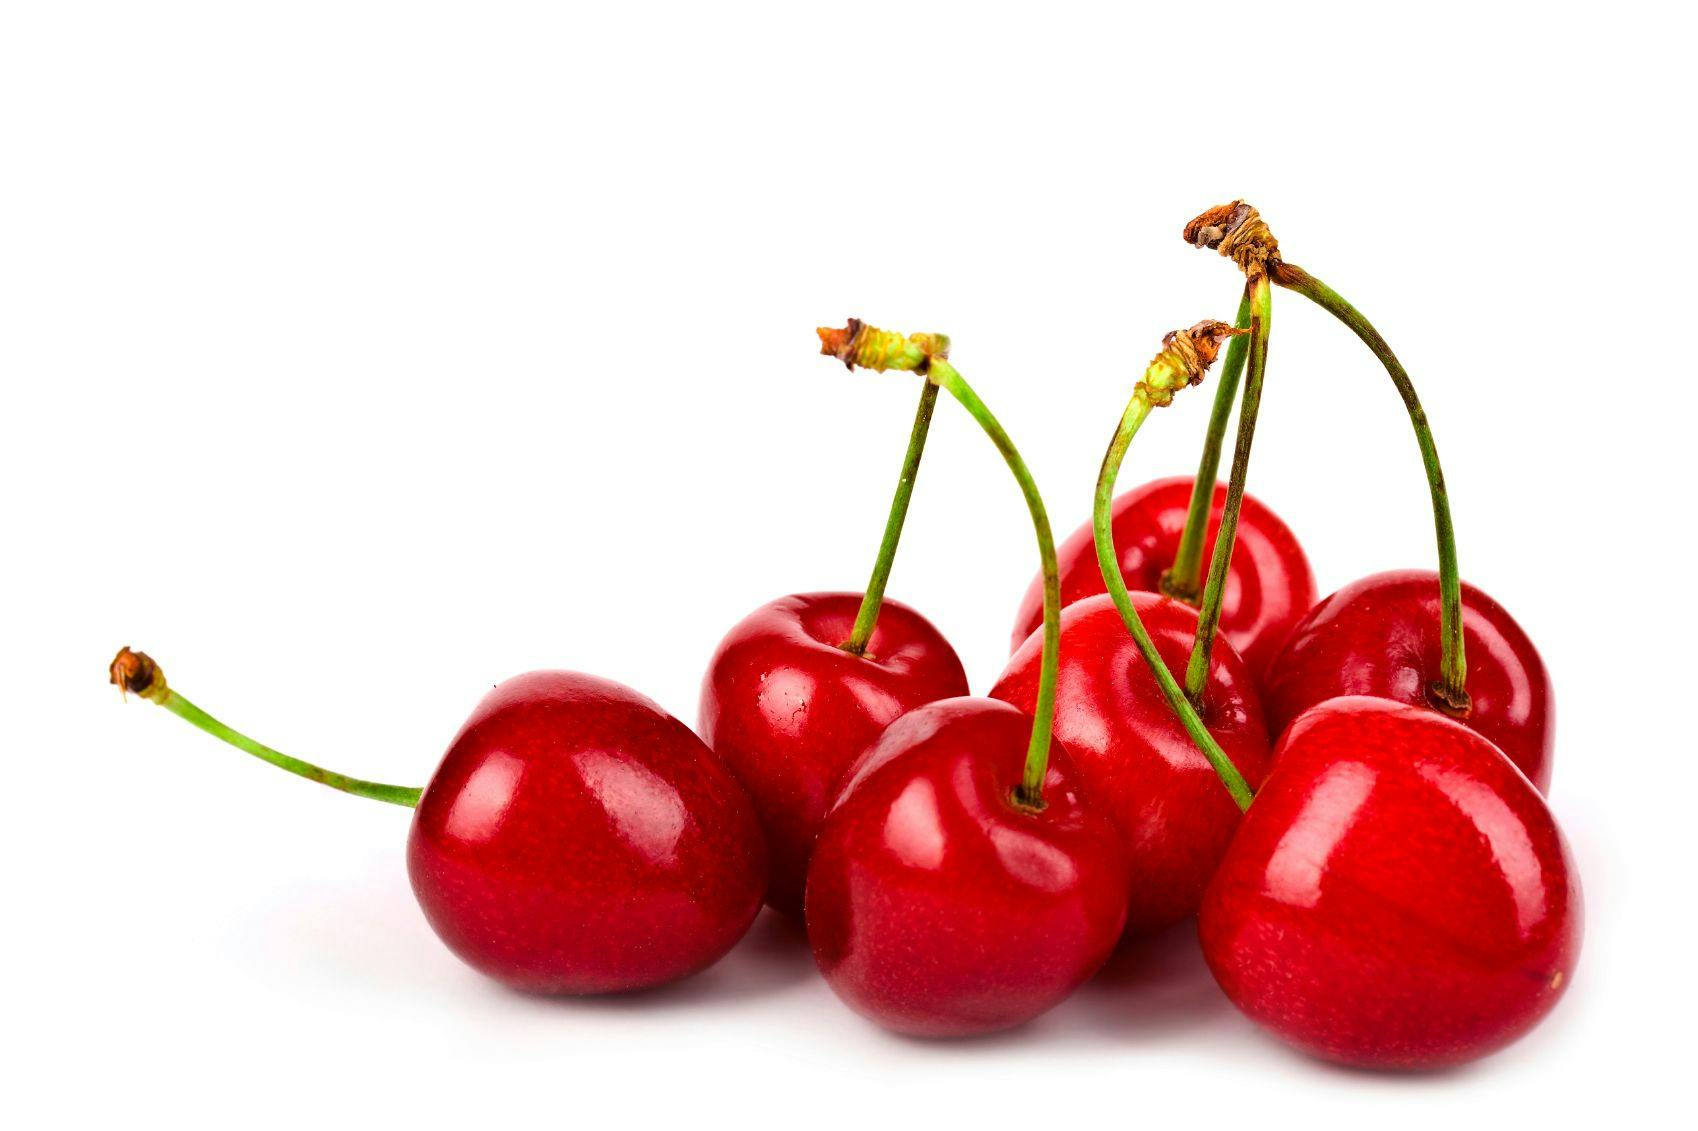 Cherries Reduce Inflammation and Oxidative Stress, Support Blood Glucose and Cognitive Health, in New Review 